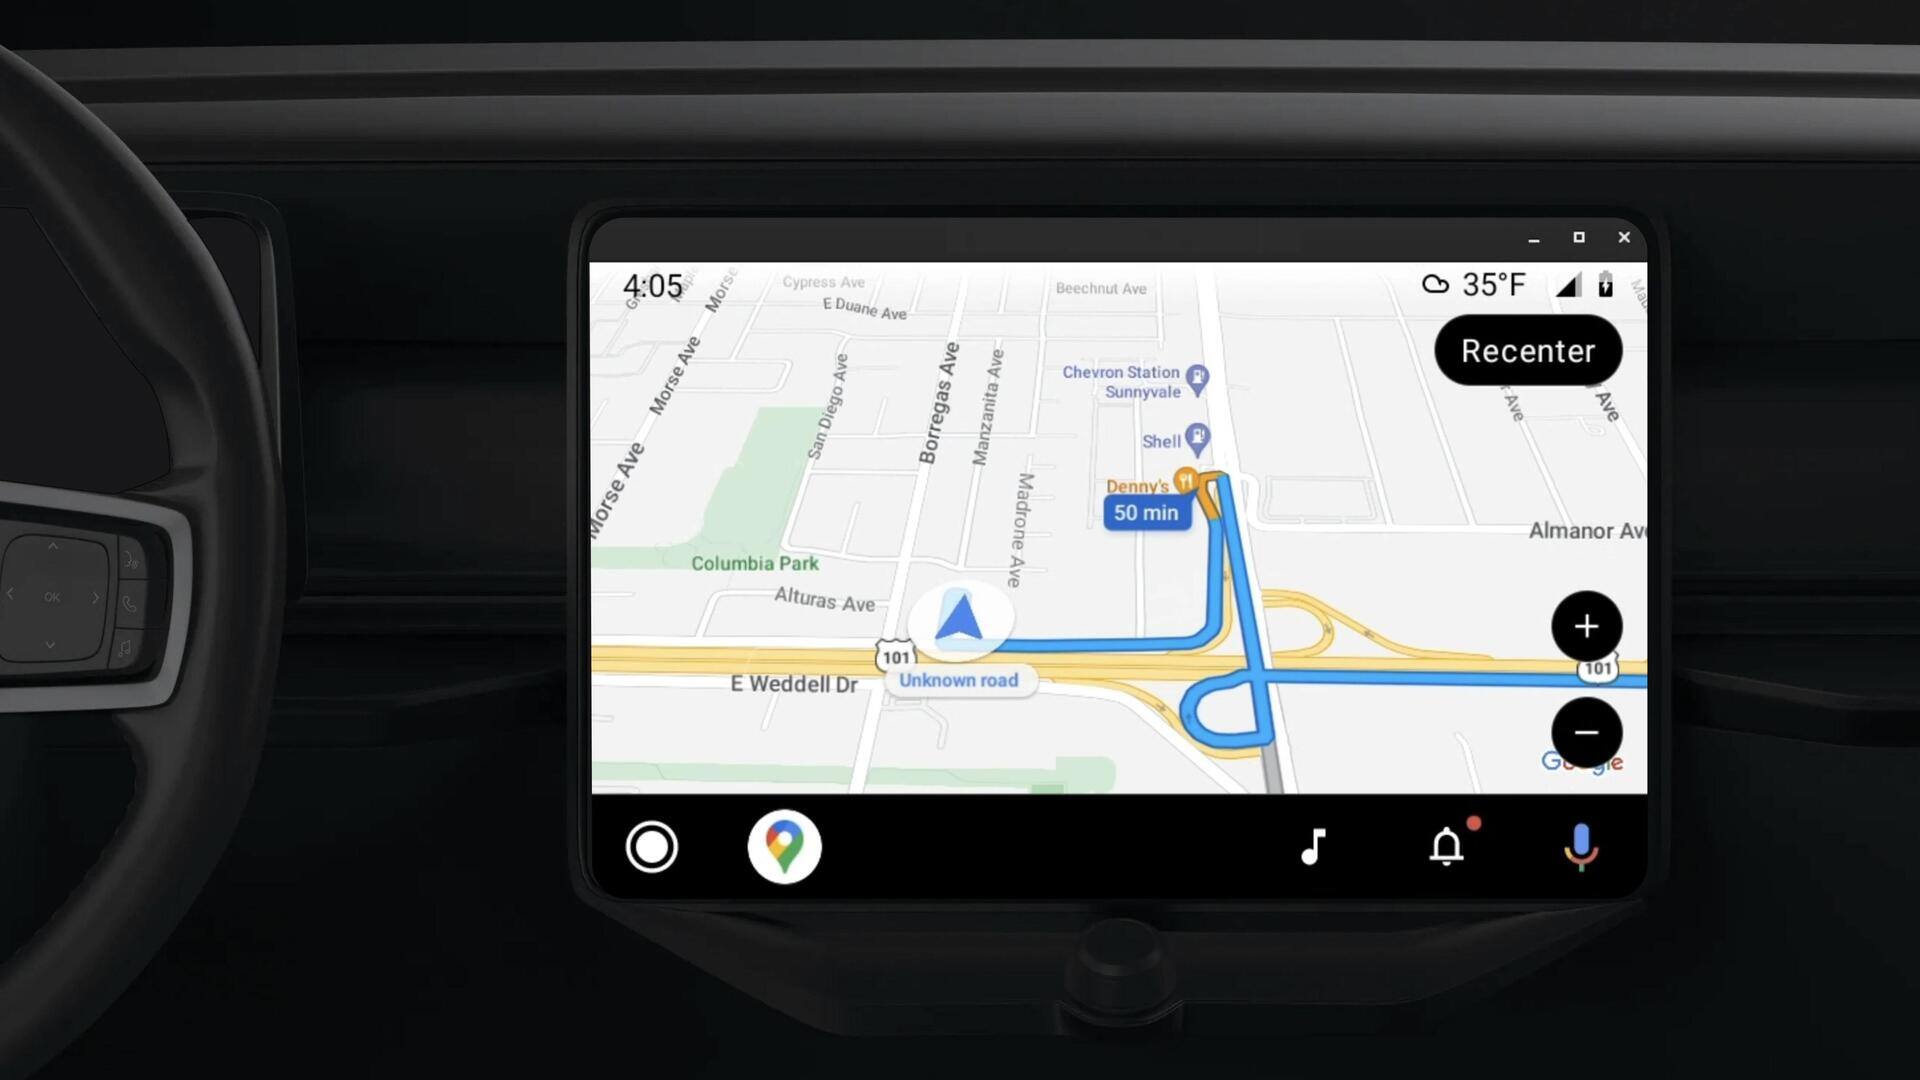 Google Maps for Android Auto receives color scheme update